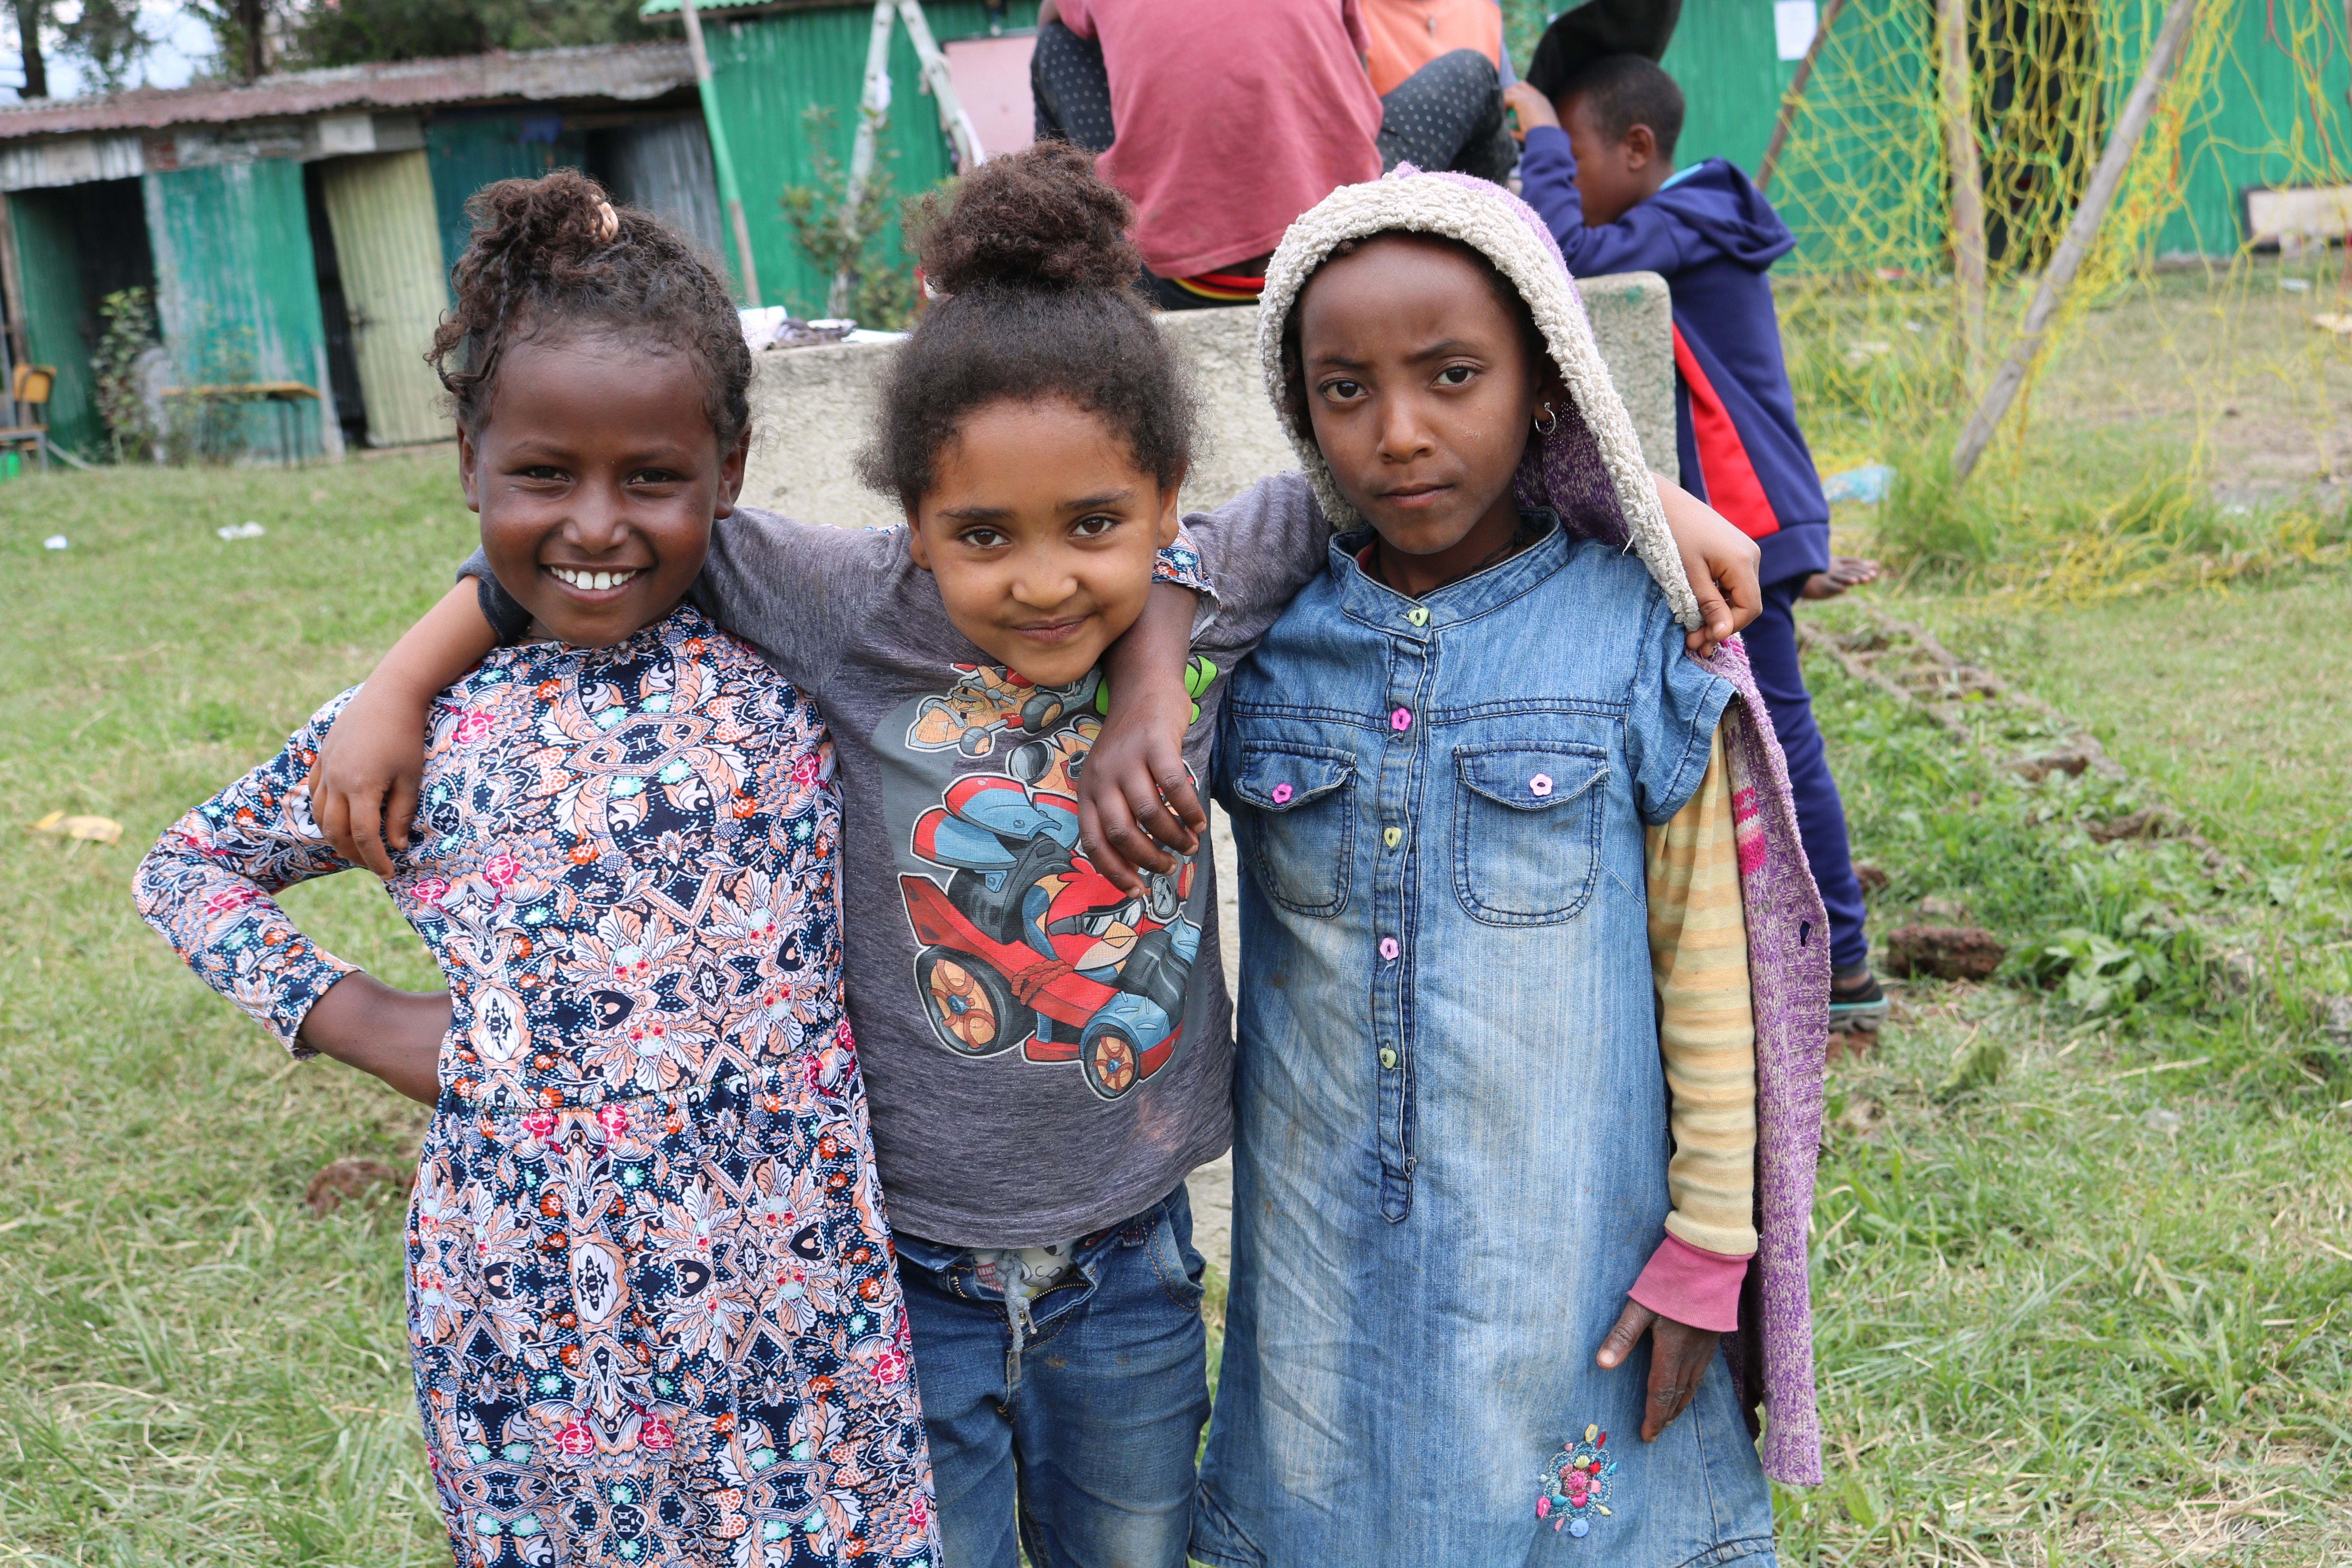 Sefel Berhanu, Mestawat Berihan, and Gennet Dereabu pose for a photo while they play on the playground after they finish lunch. They enjoy playing on the playground and board games. Image by Abigail Bekele. Ethiopia, 2018.